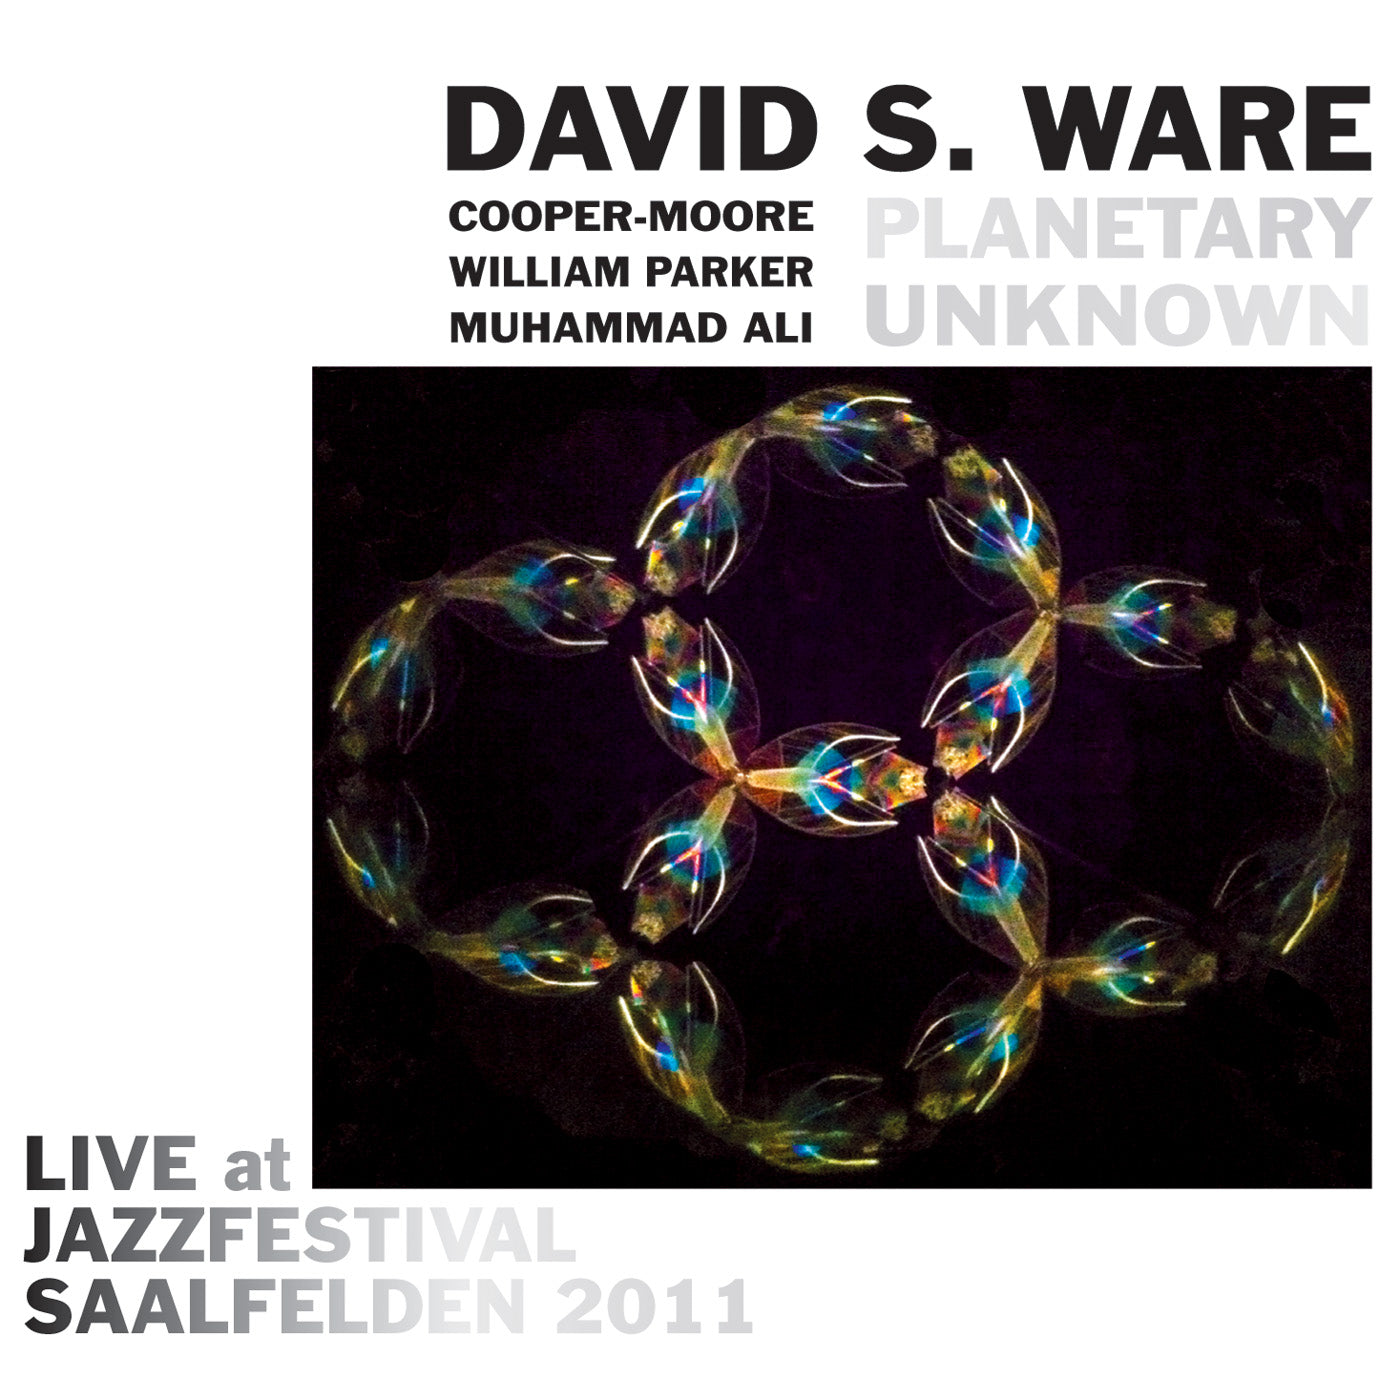 David S. Ware / Planetary Unknown – Live at Jazzfestival